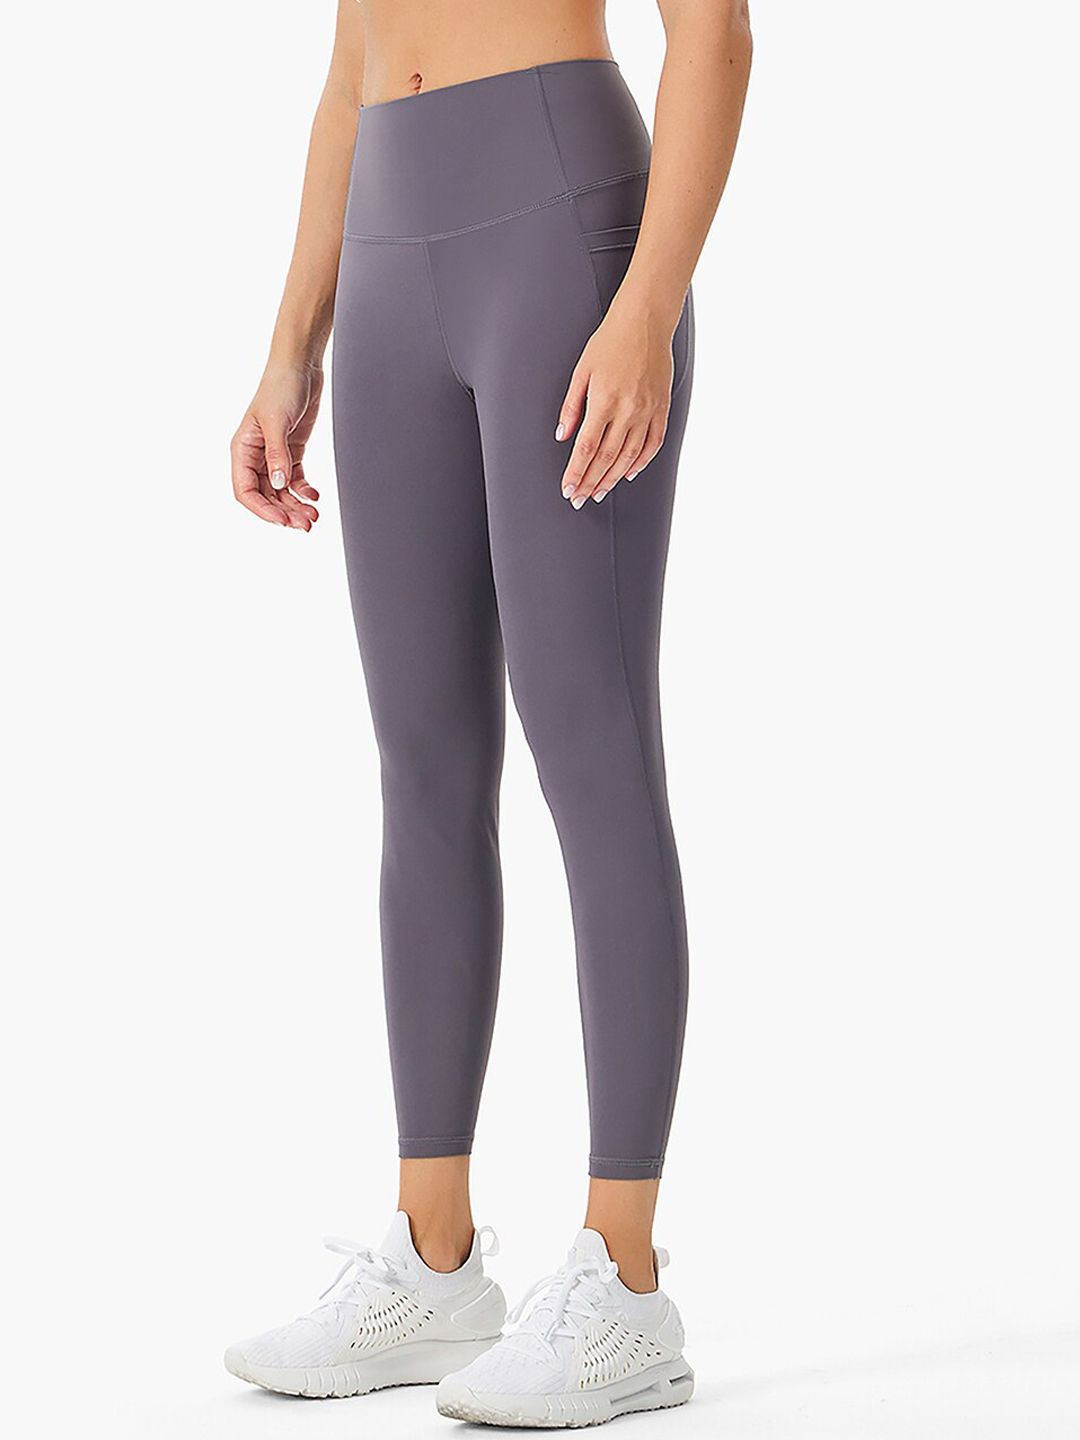 JC Collection Women Grey Solid Antimicrobial Tights Price in India